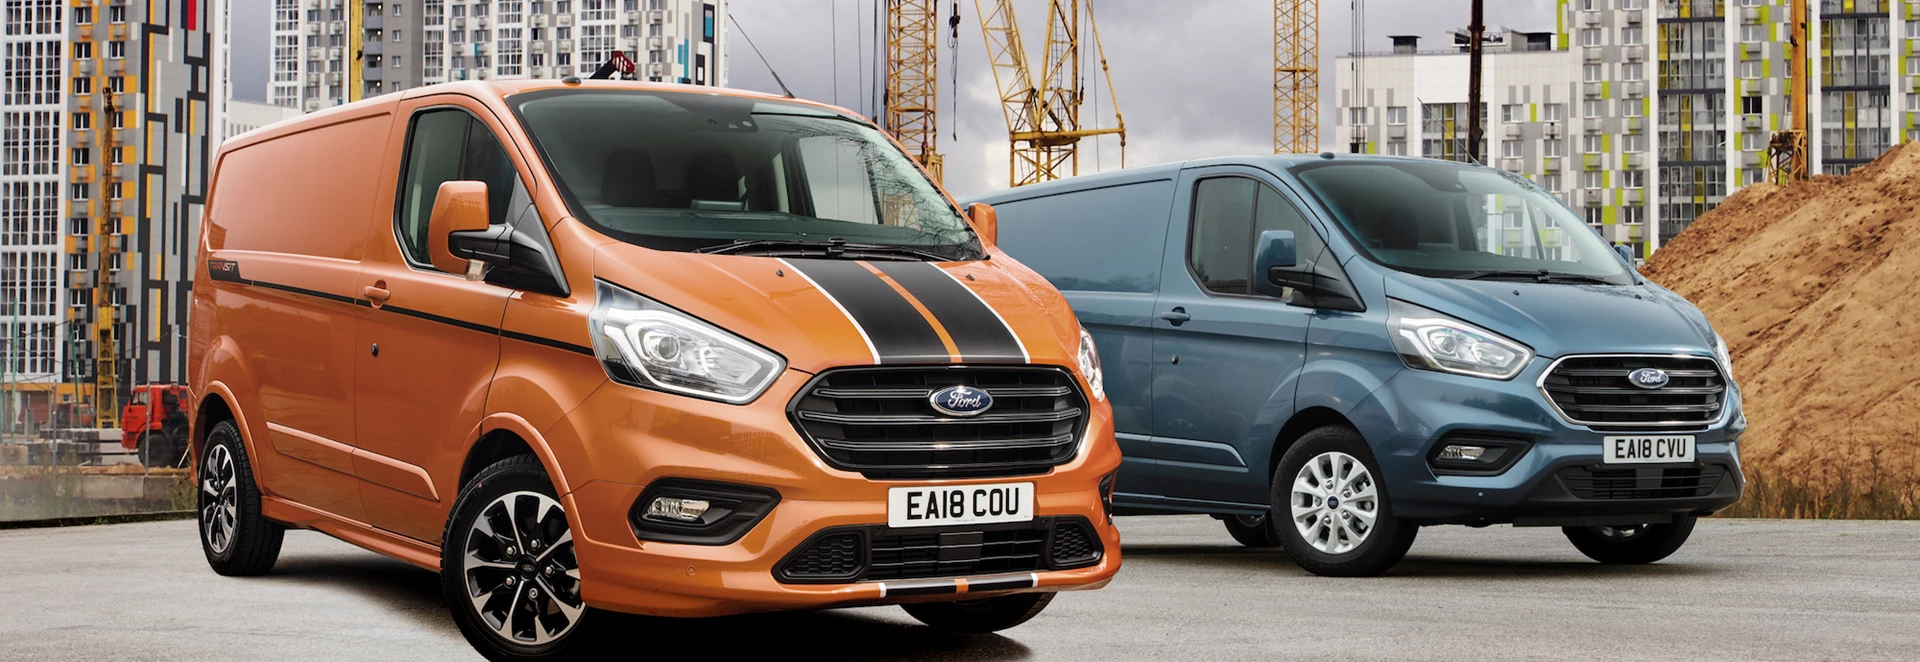 Ford leads total vehicle sales in October